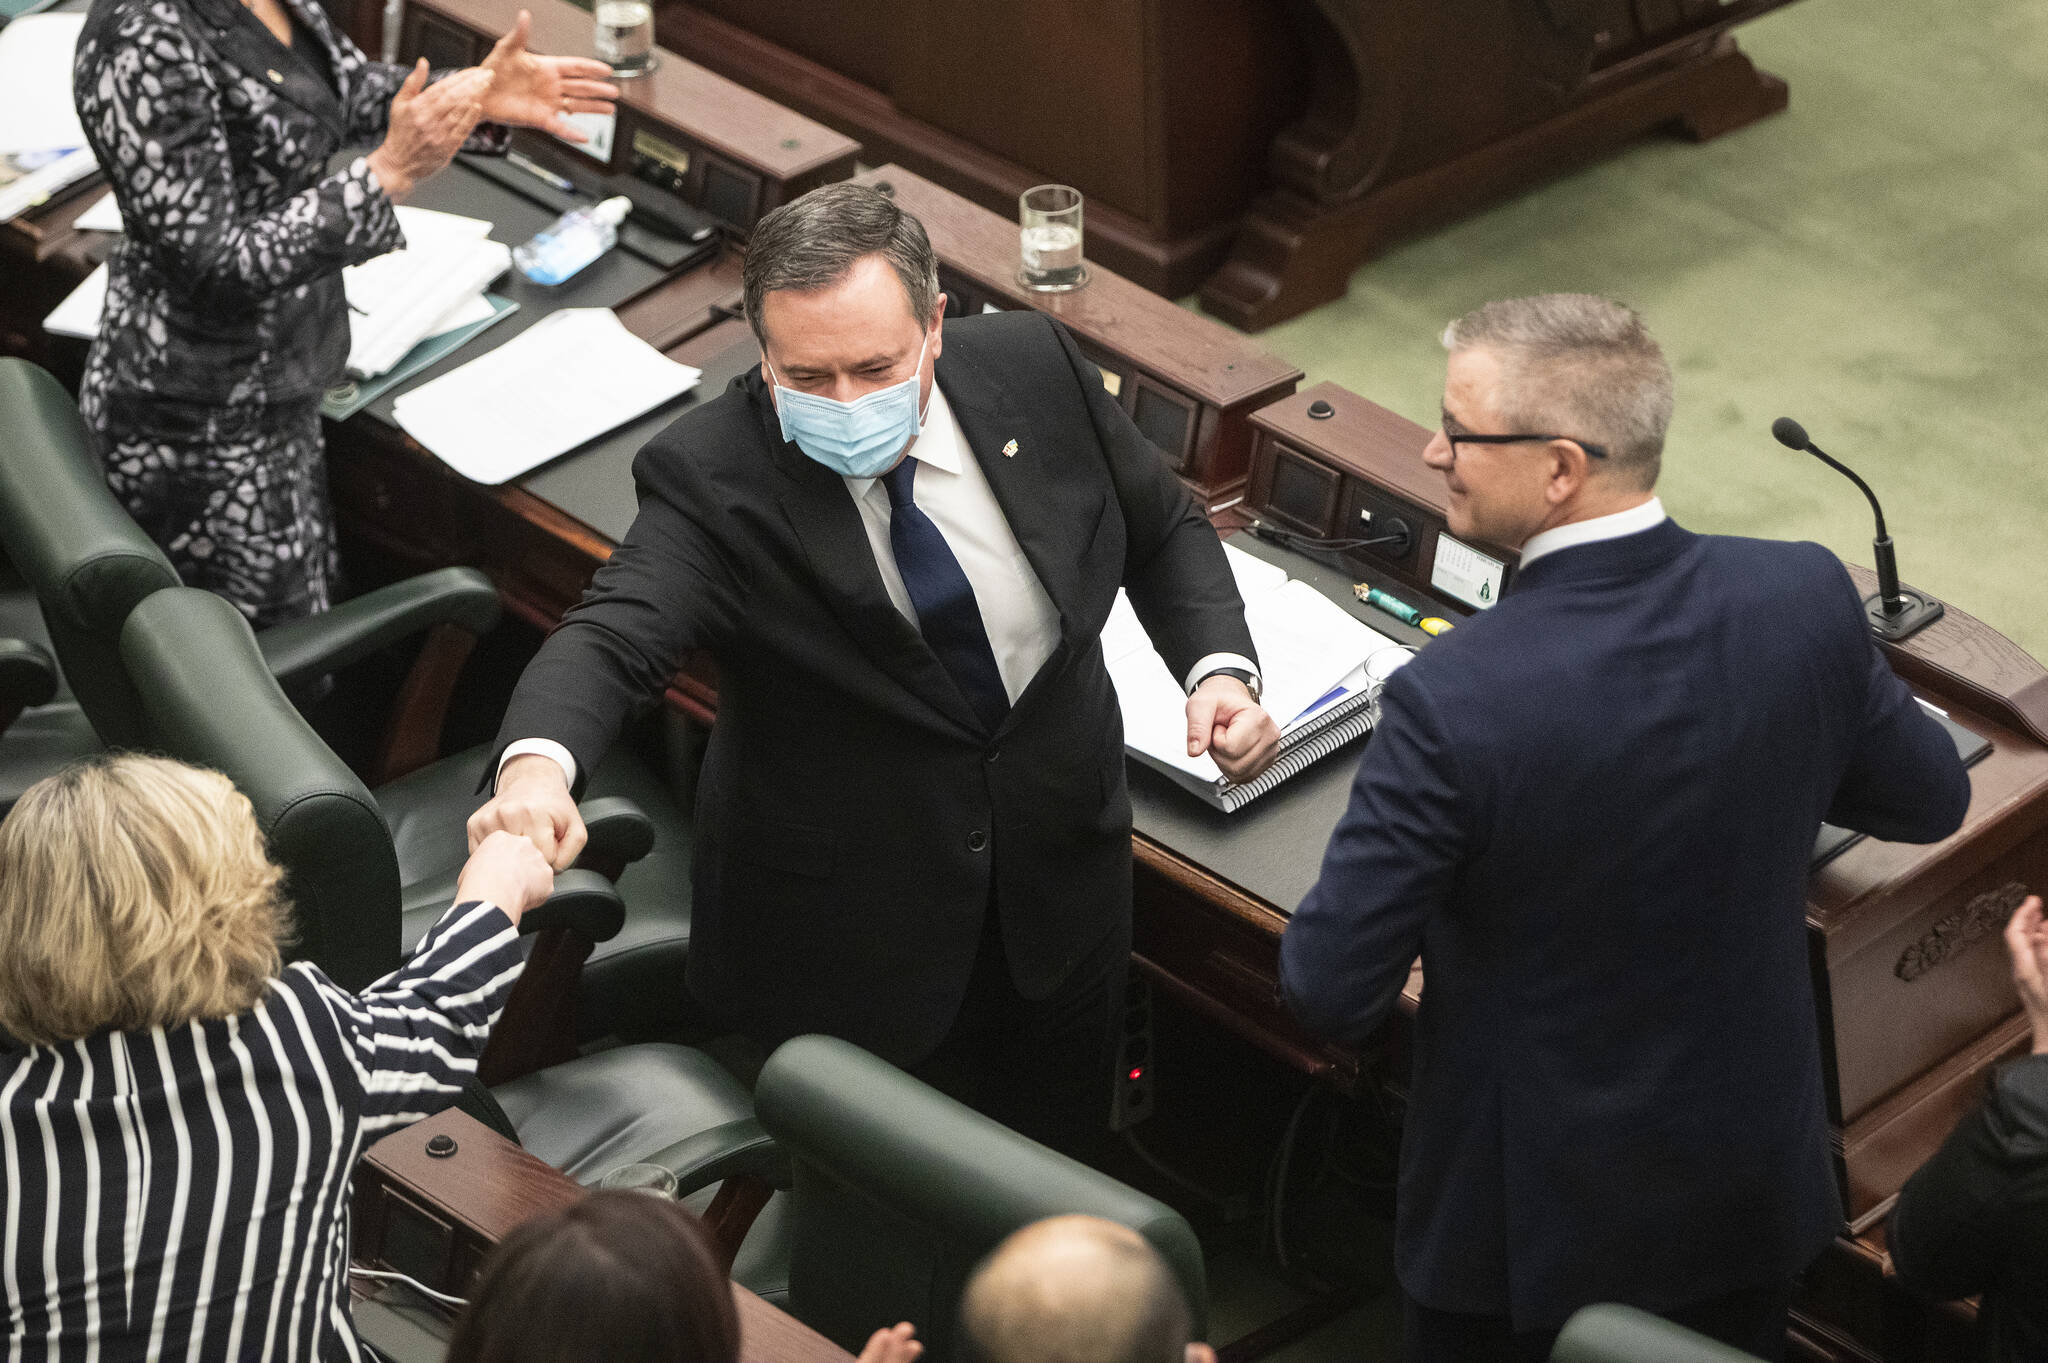 Alberta Premier Jason Kenney fist bumps an MLA after Finance Minister Travis Toews delivered the 2022 budget in Edmonton on Thursday February 24, 2022. THE CANADIAN PRESS/Jason Franson